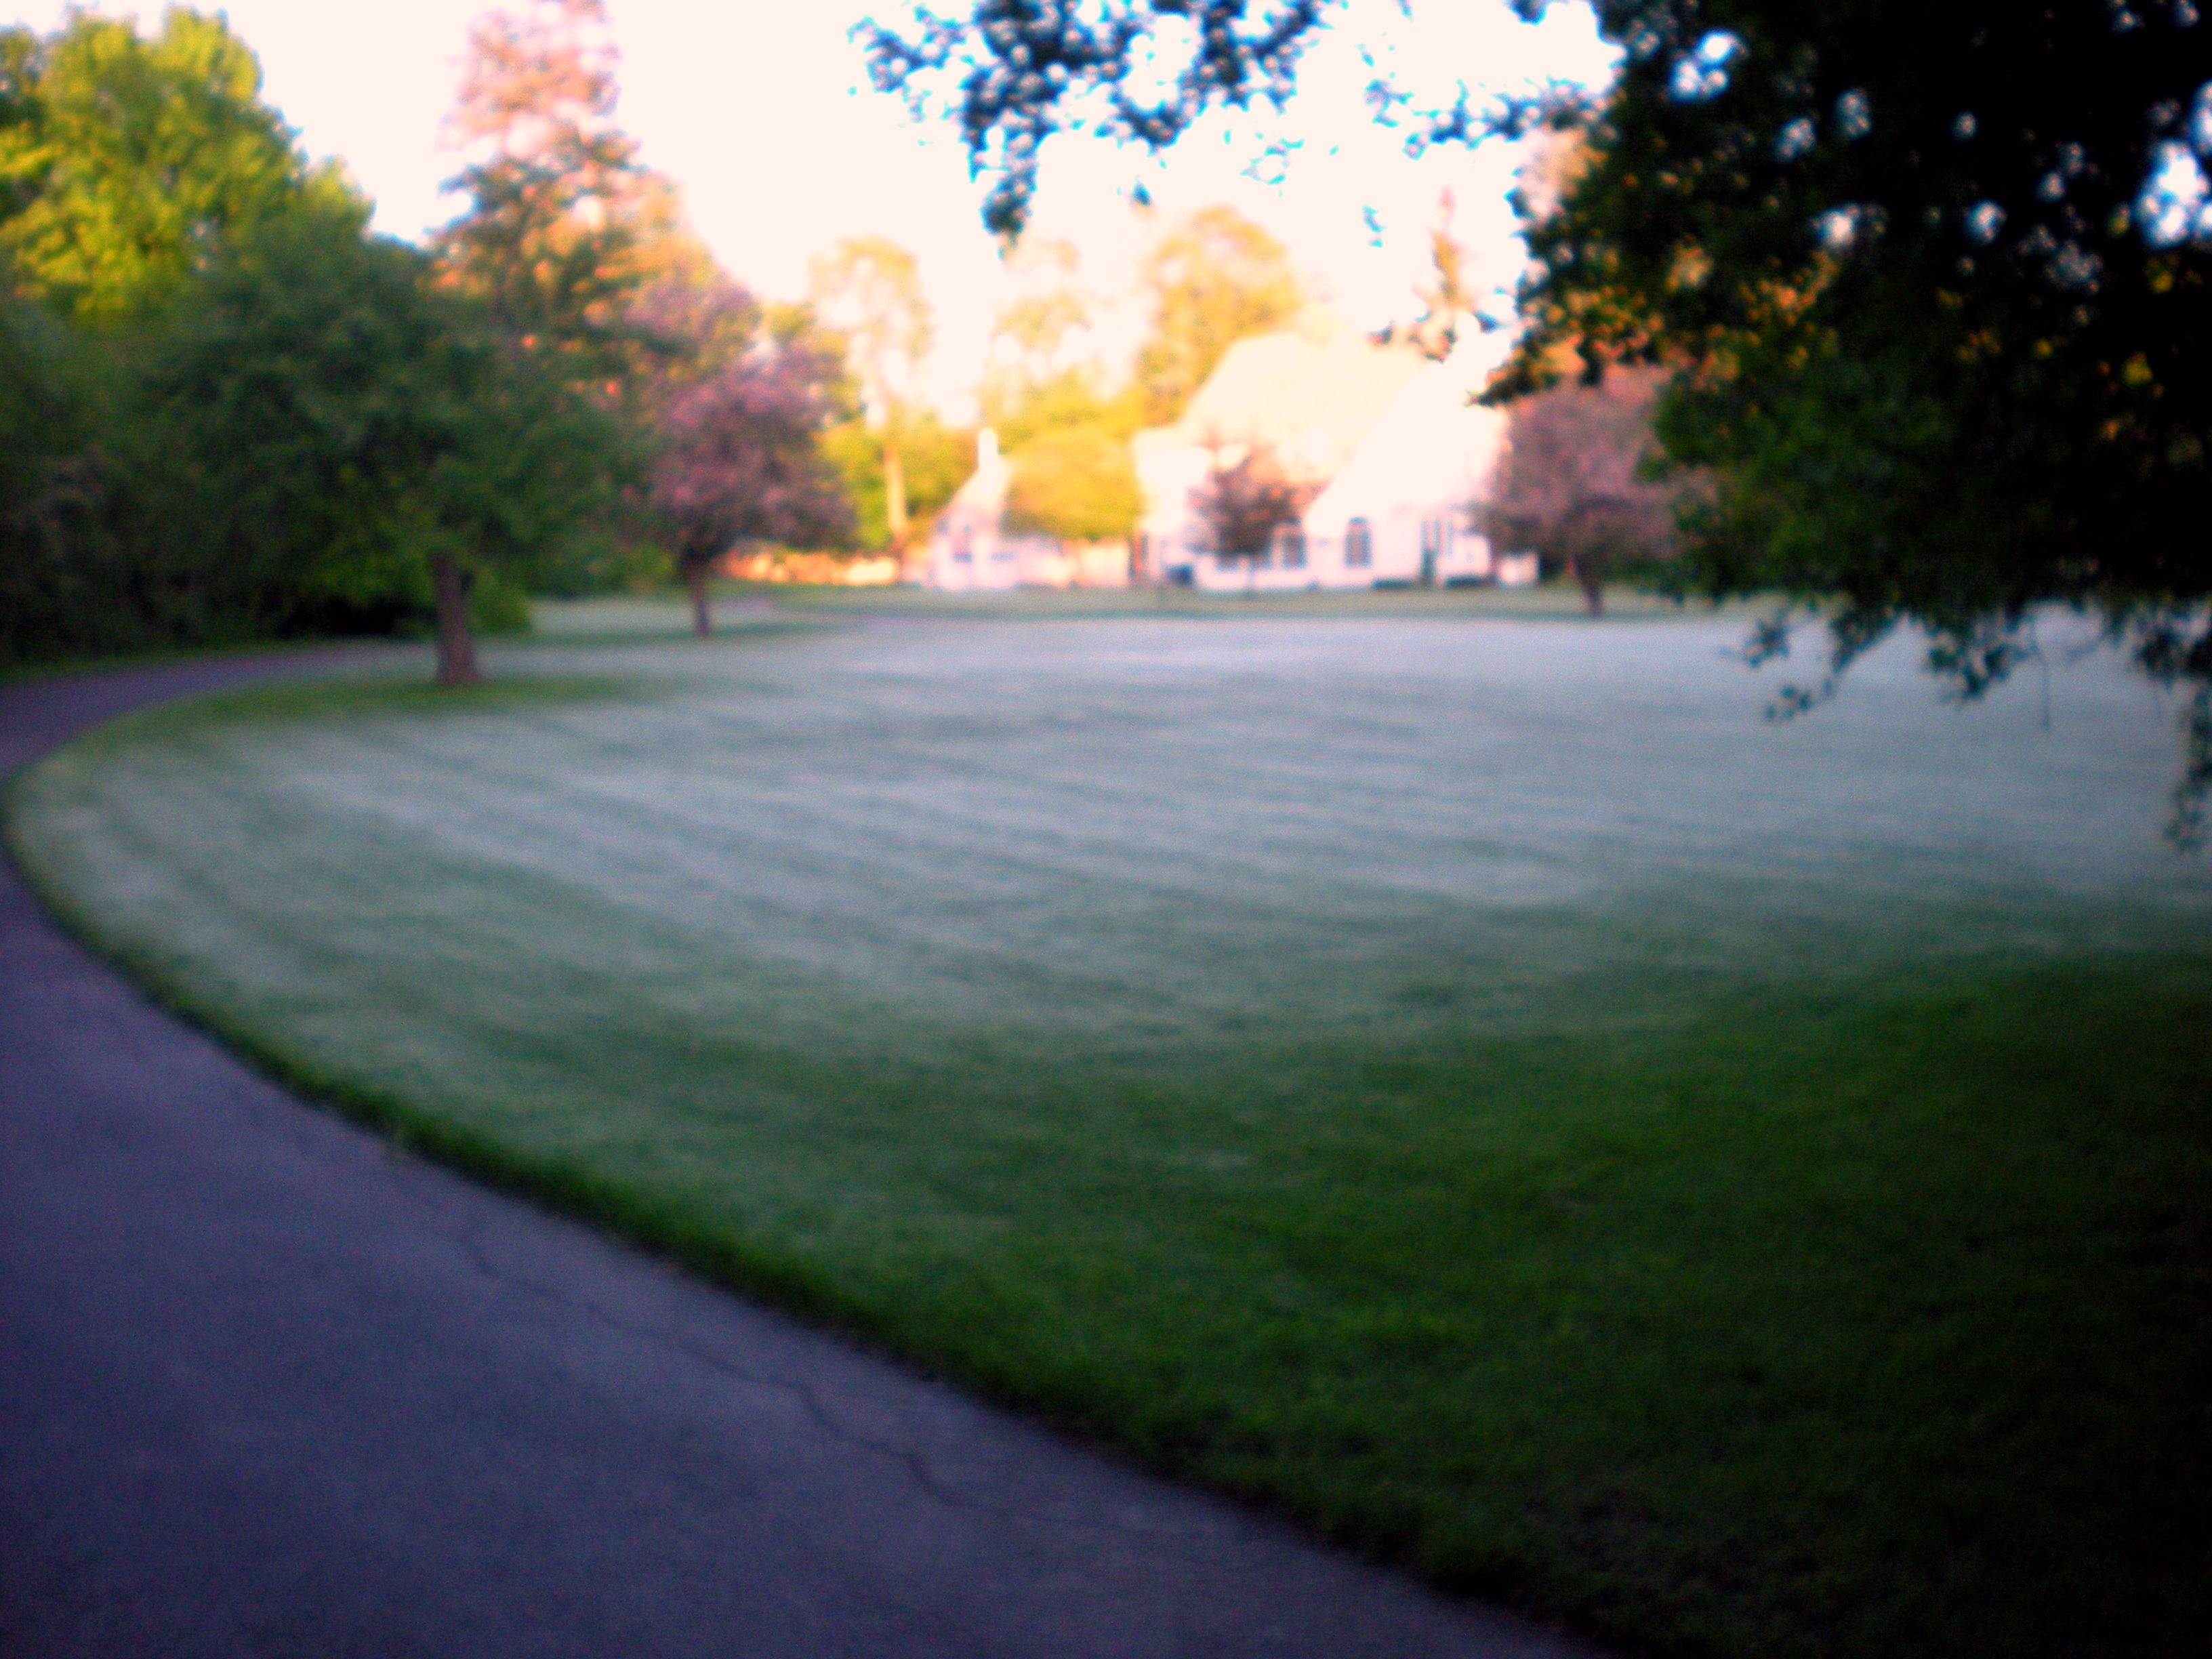 On a cold morning, 34 degrees, frost was all over the lawns